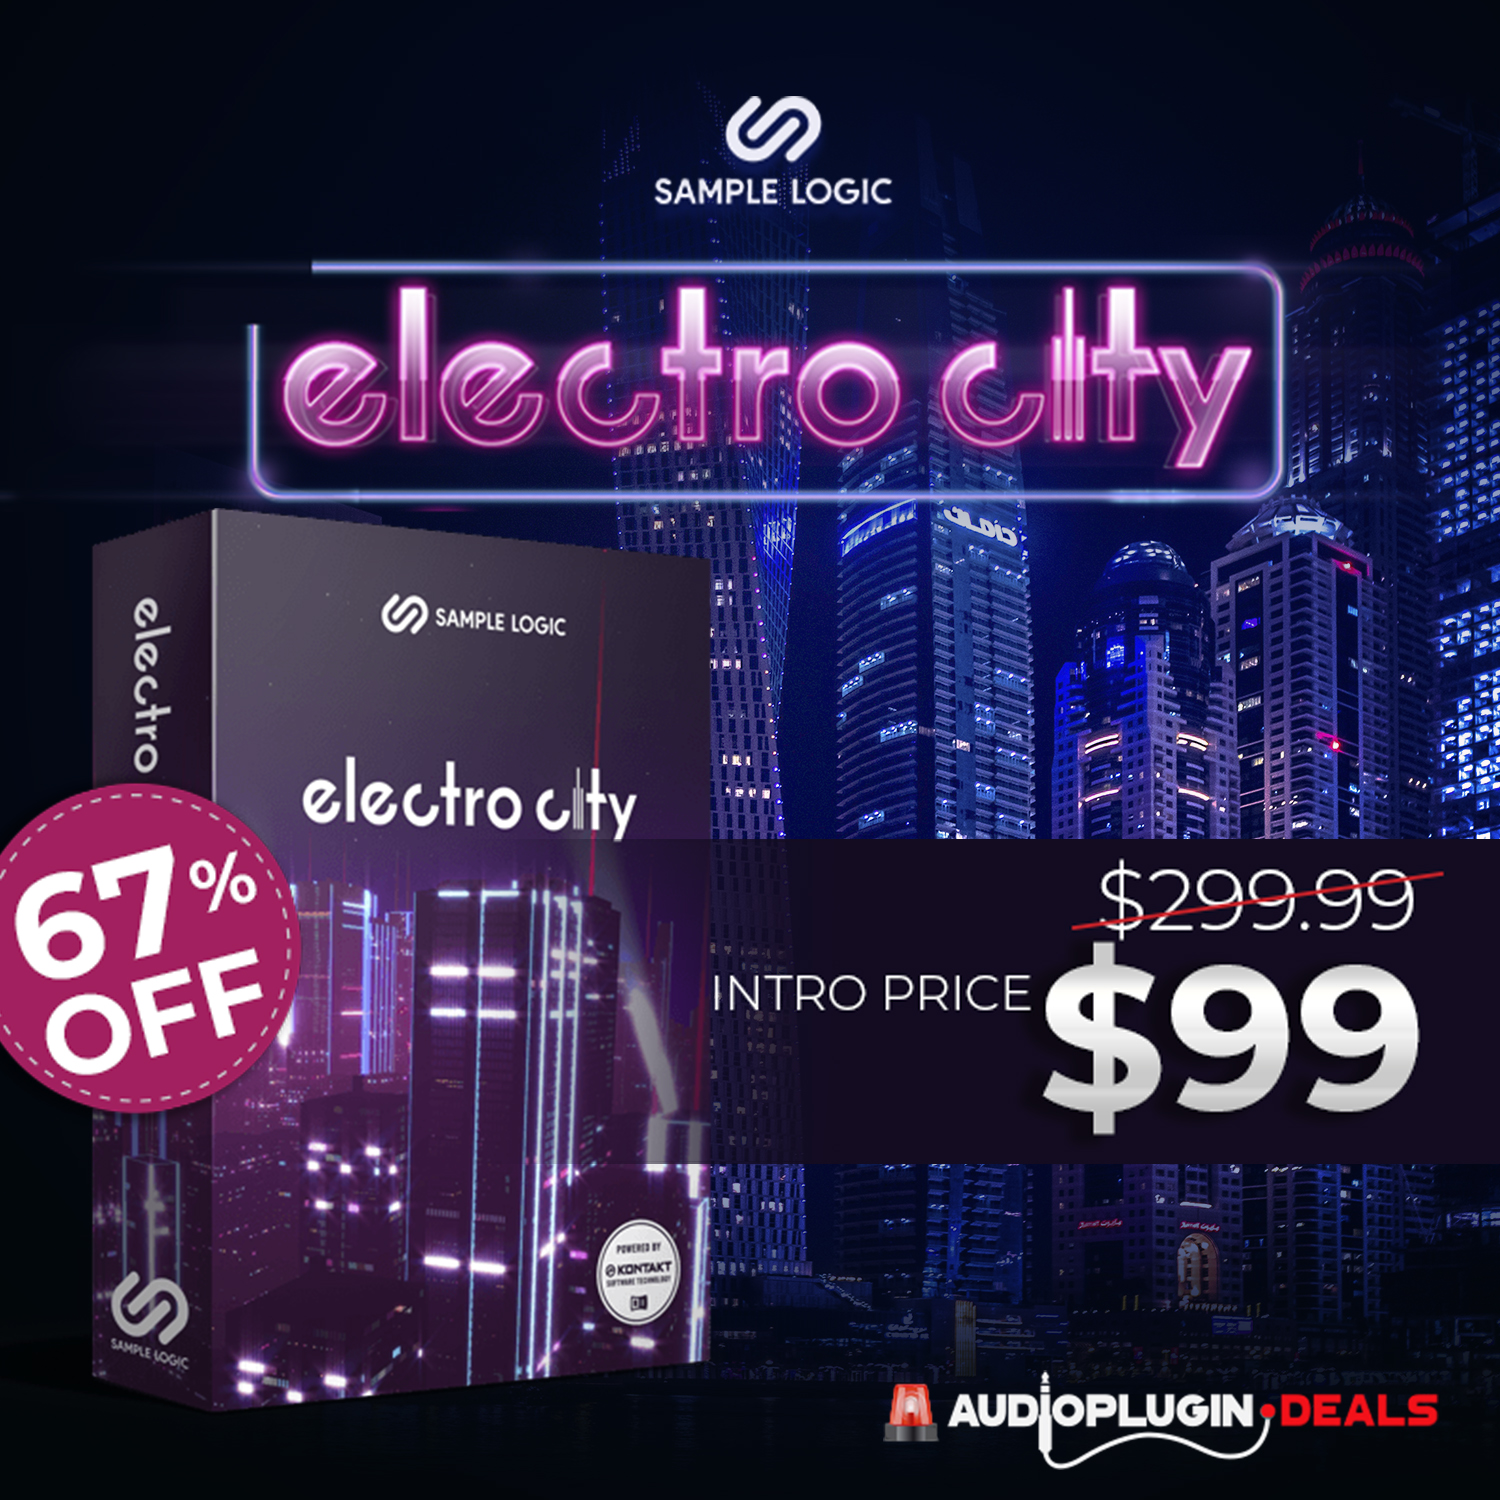 Electro City by Sample Logic on time limited sale